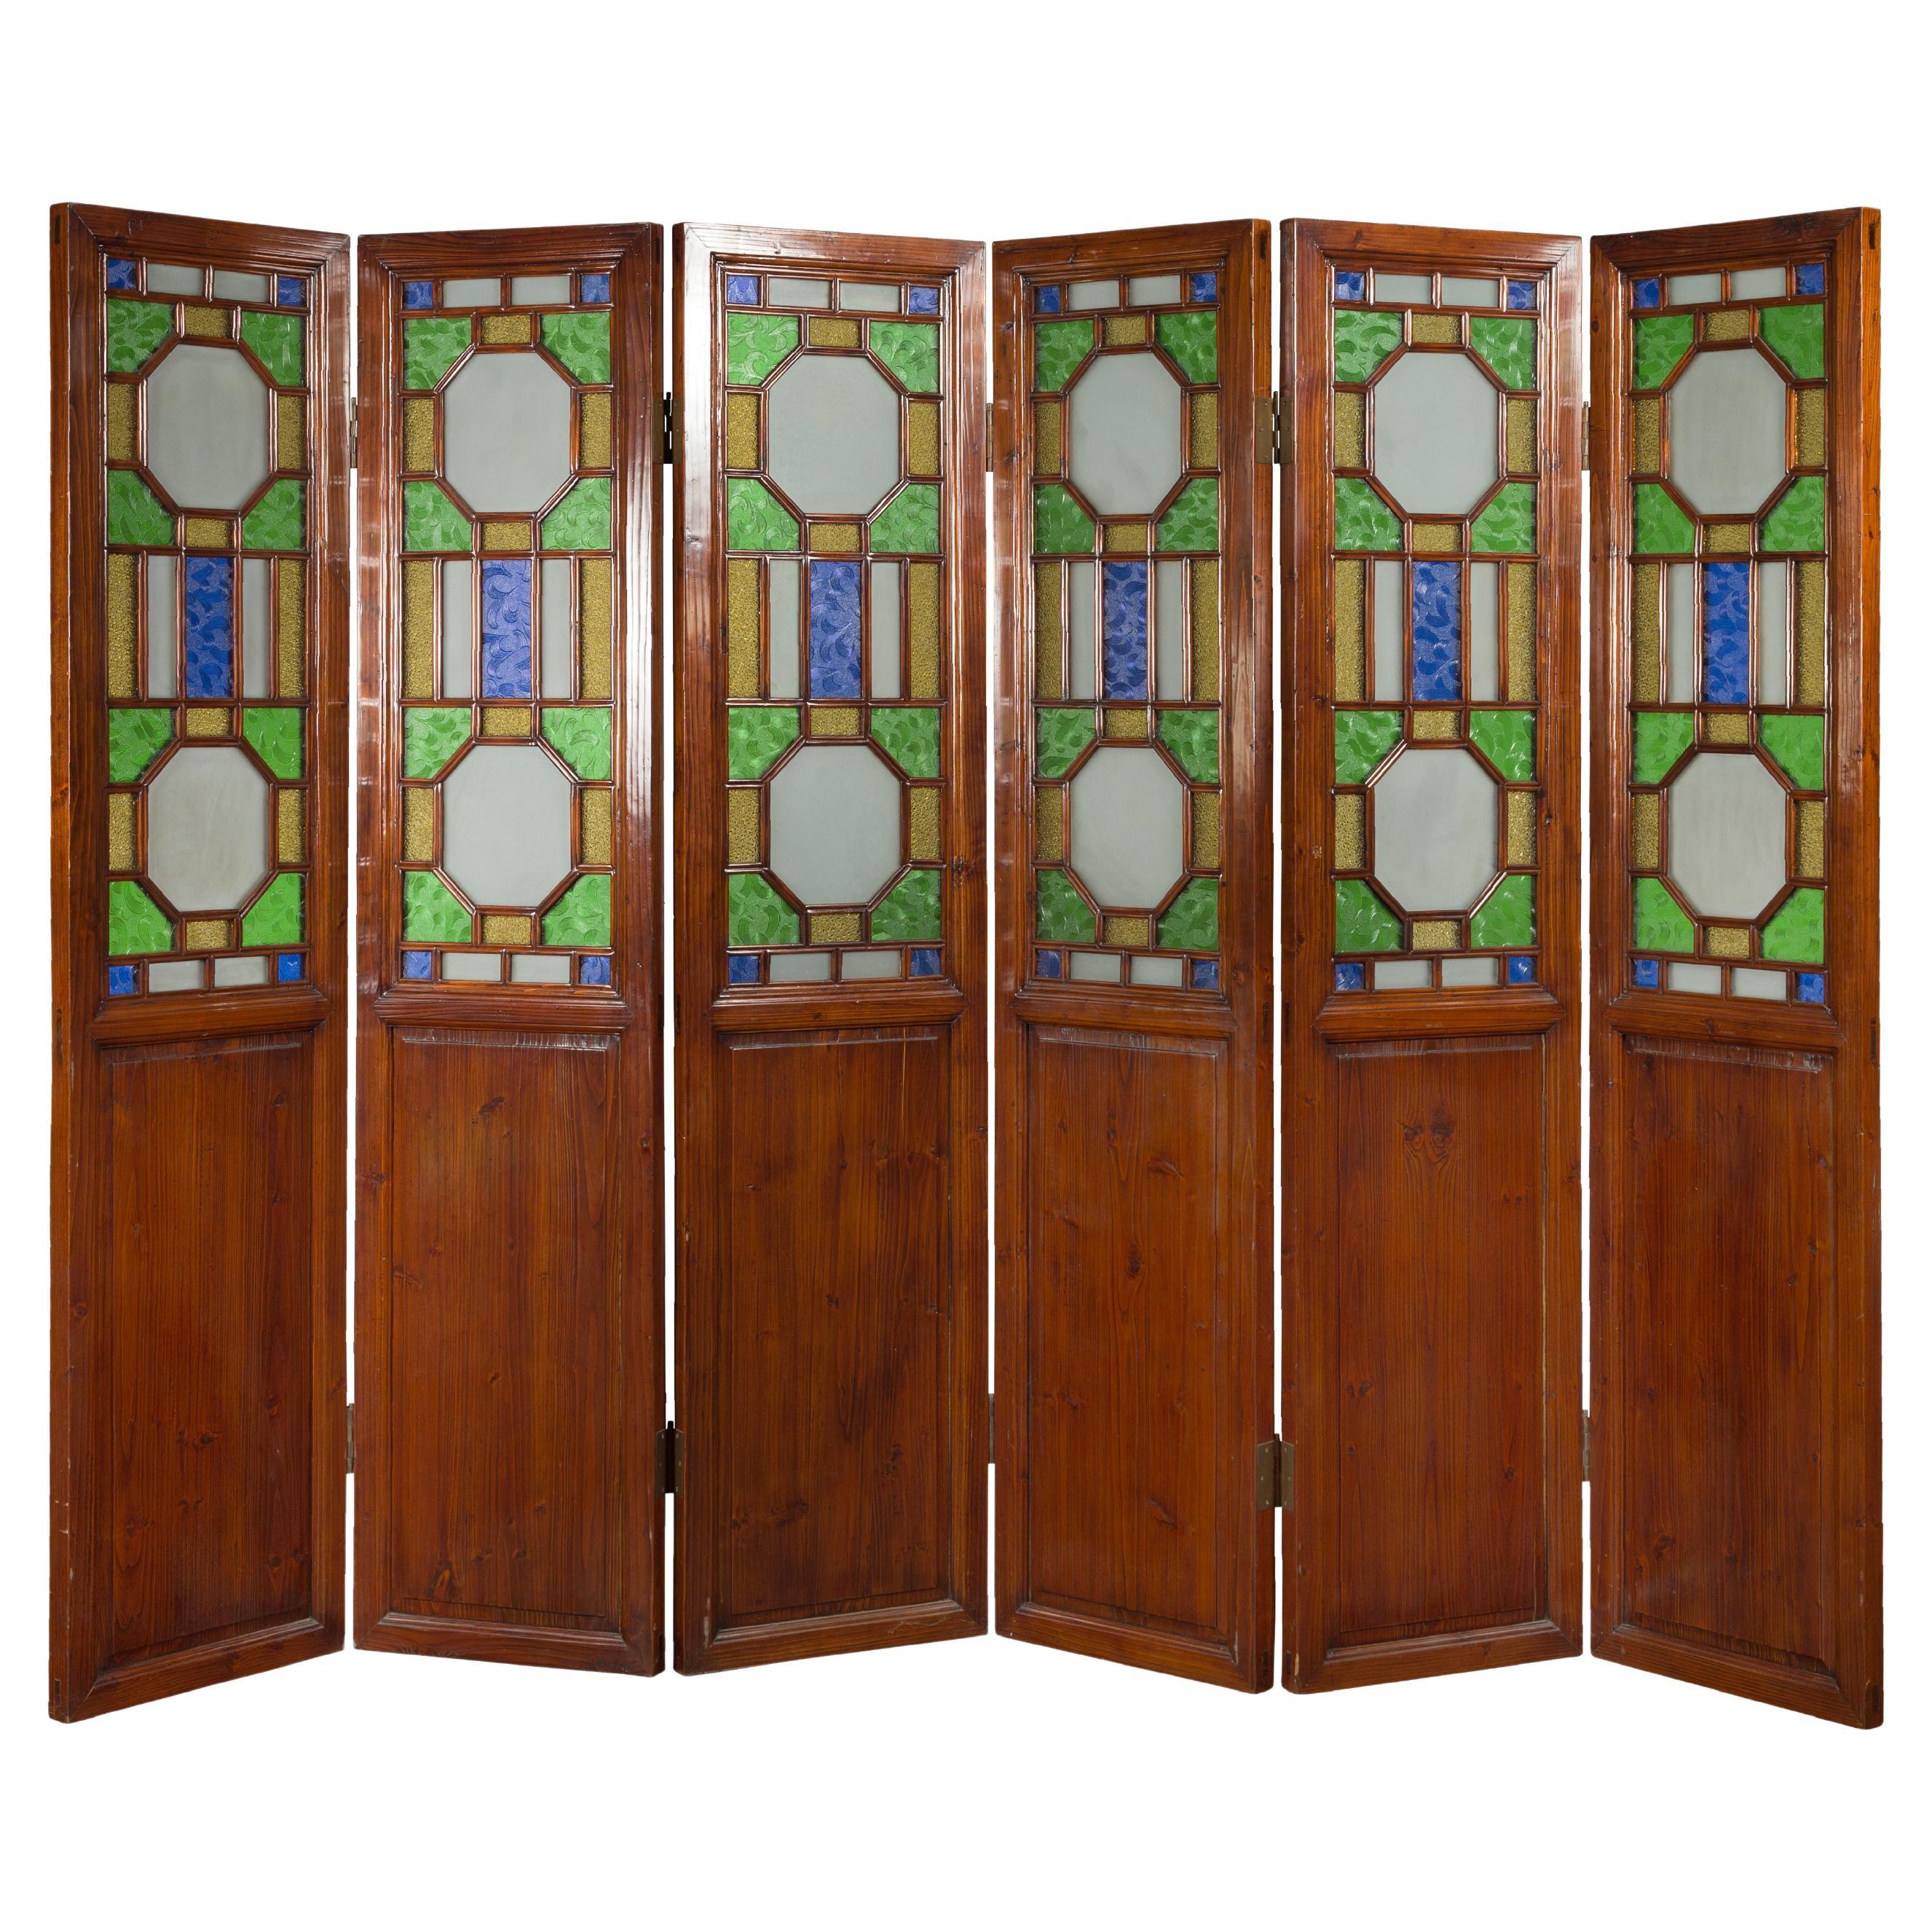 Chinese Antique Six-Panel Folding Screen with Stained Glass Geometric Motifs For Sale